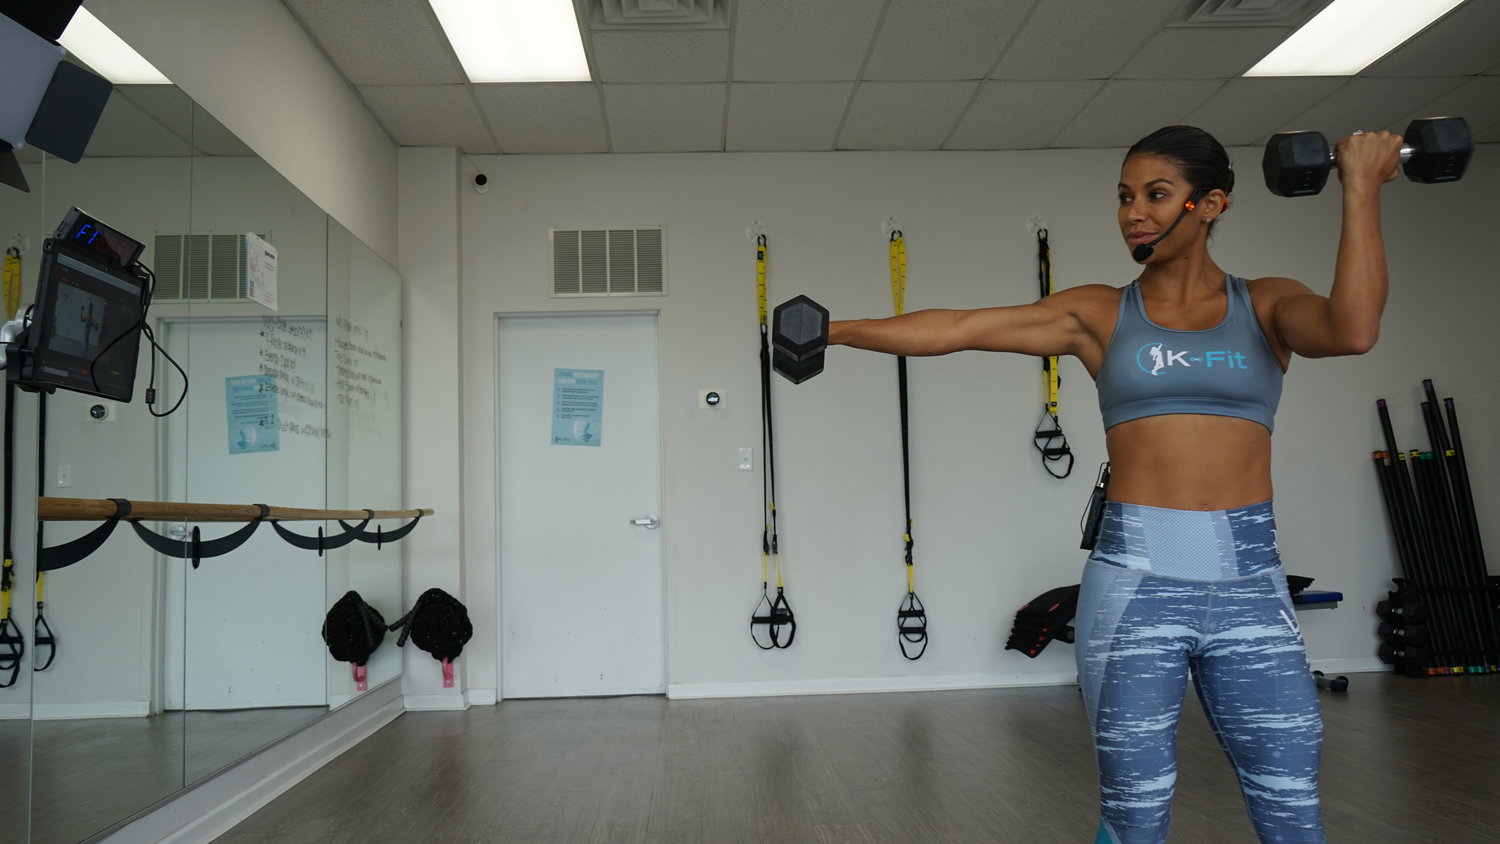 K-Fit Boutique Gym owner Karina Melo demonstrated how she has been conducting her daily virtual workout classes since pandemic forced the closure of her studio space. She plans to reopen in phases as restrictions loosened on Monday, Aug. 24.